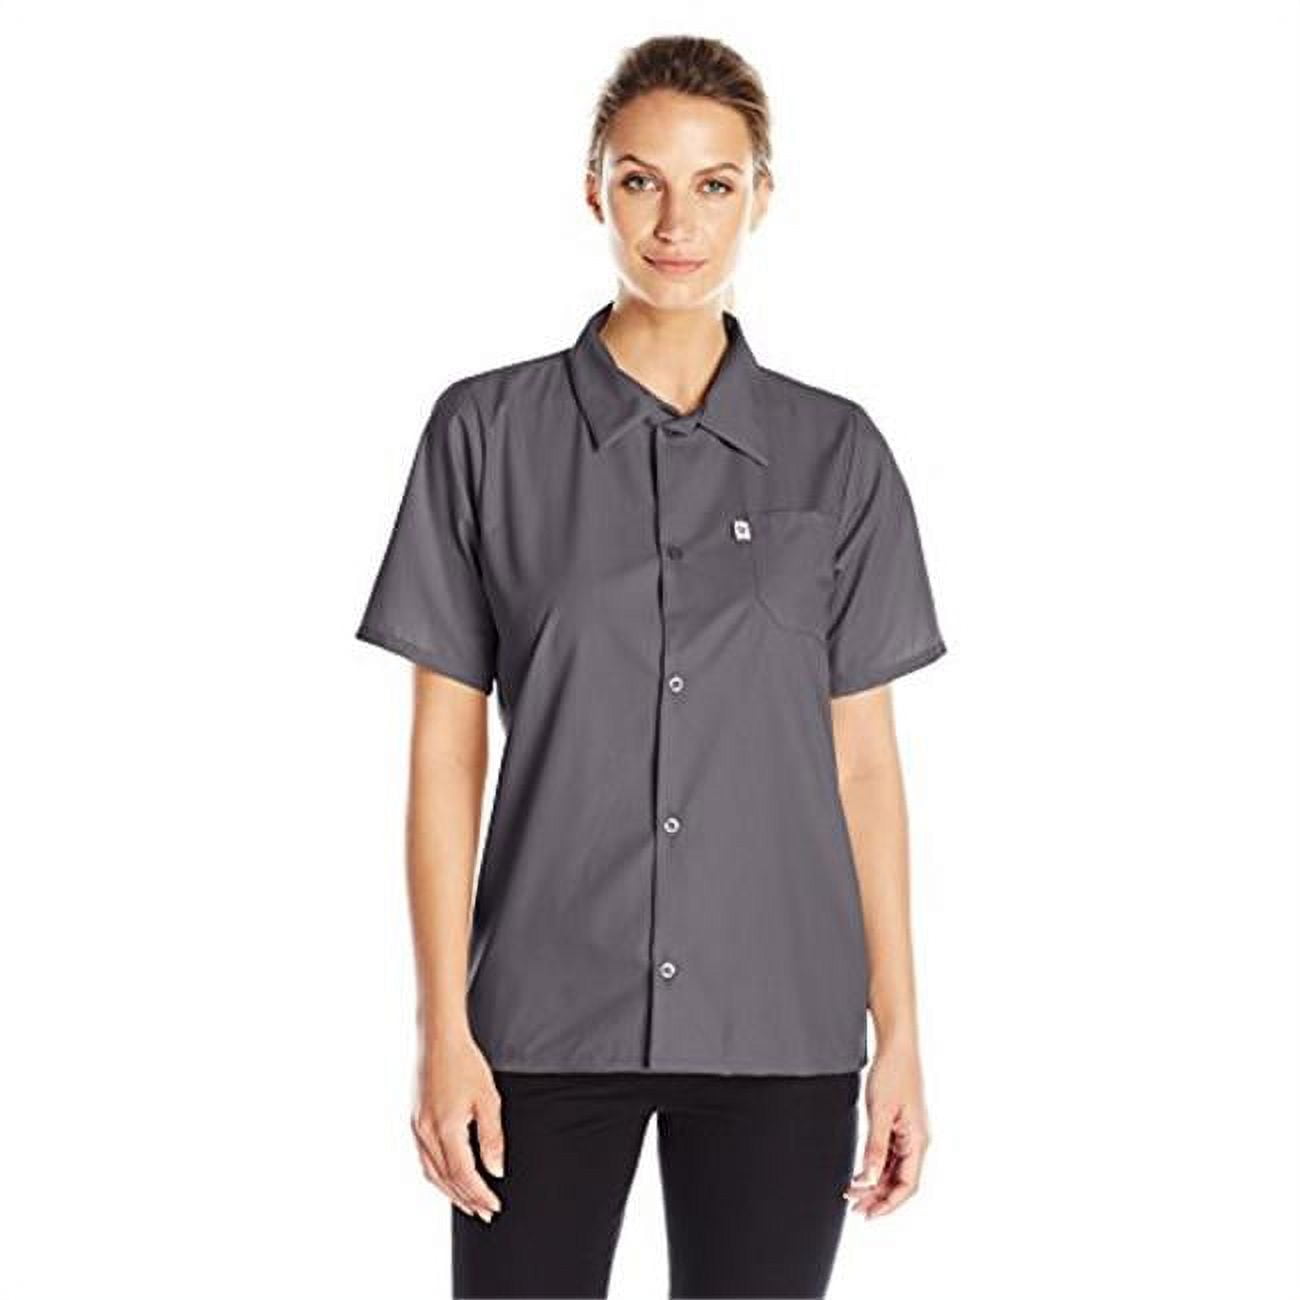 Vtex 0920-6404 Uncommon Threads Womens Utility Shirt 5 Button, Slate - Large